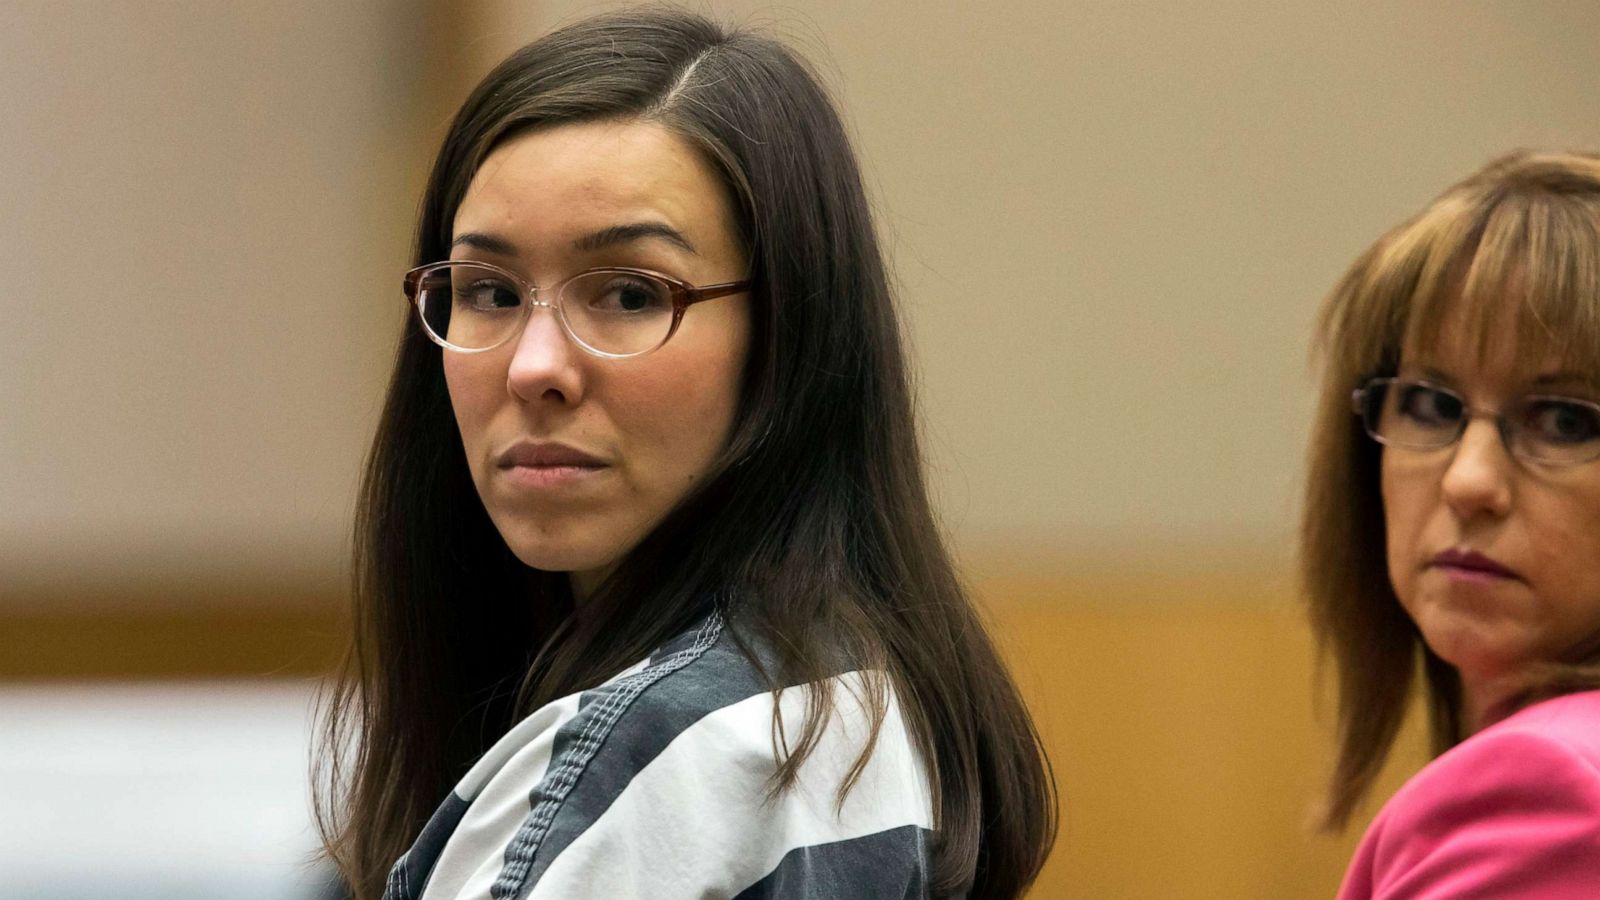 Friends say they warned Travis Alexander that Jodi Arias was dangerous for months before she killed photo